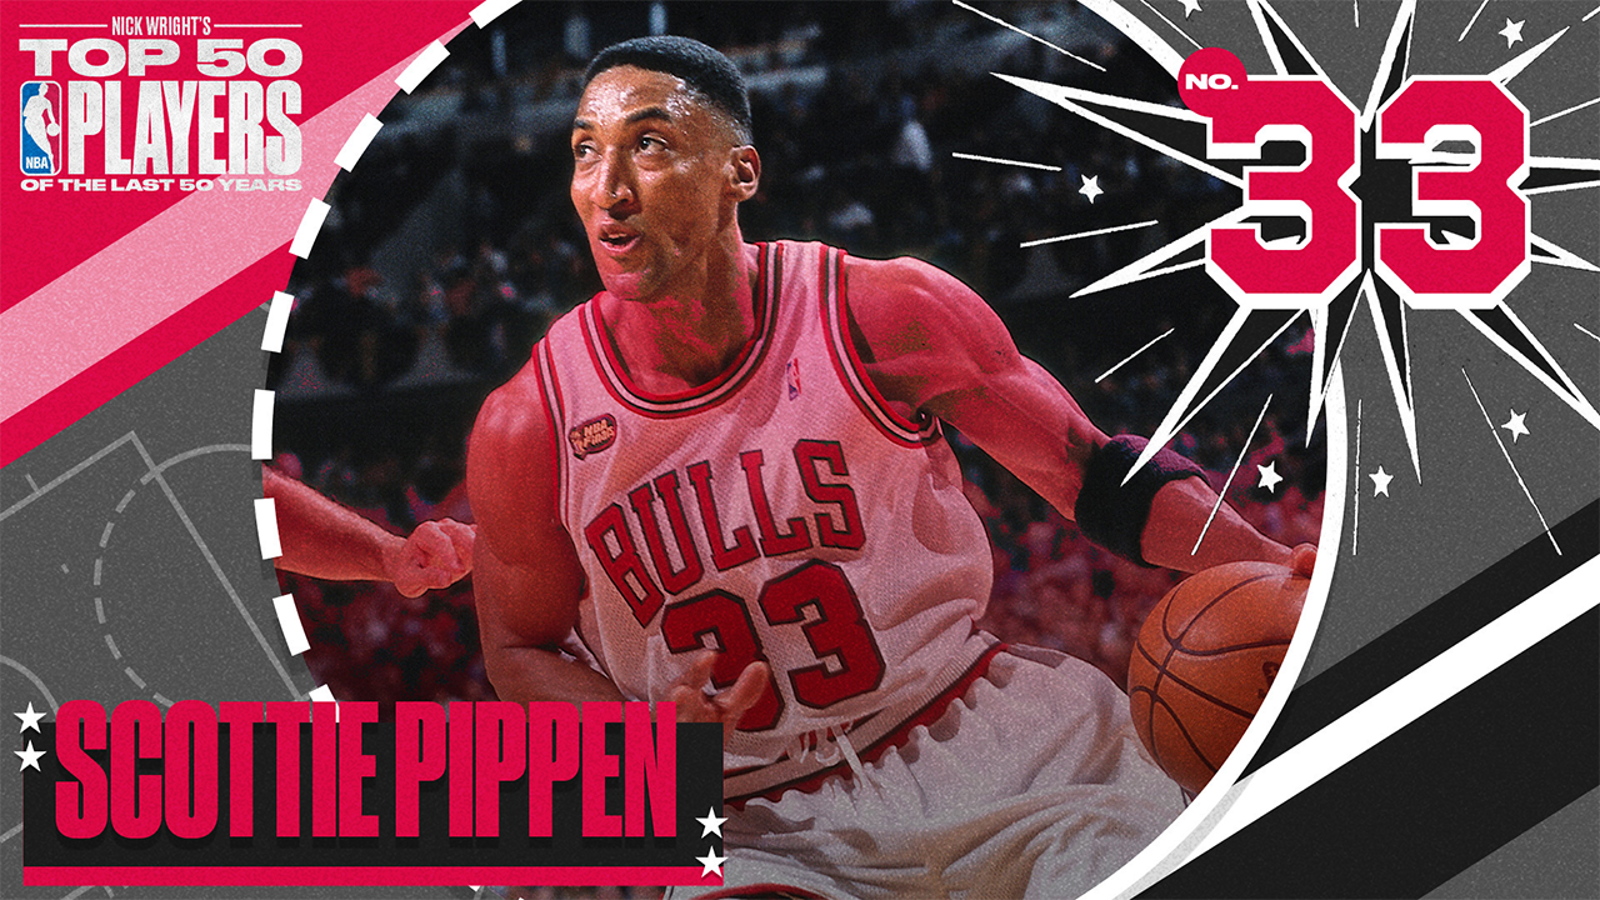 Scottie Pippen is No. 33 on Nick Wright's Top 50 NBA Players of the Last 50 Years